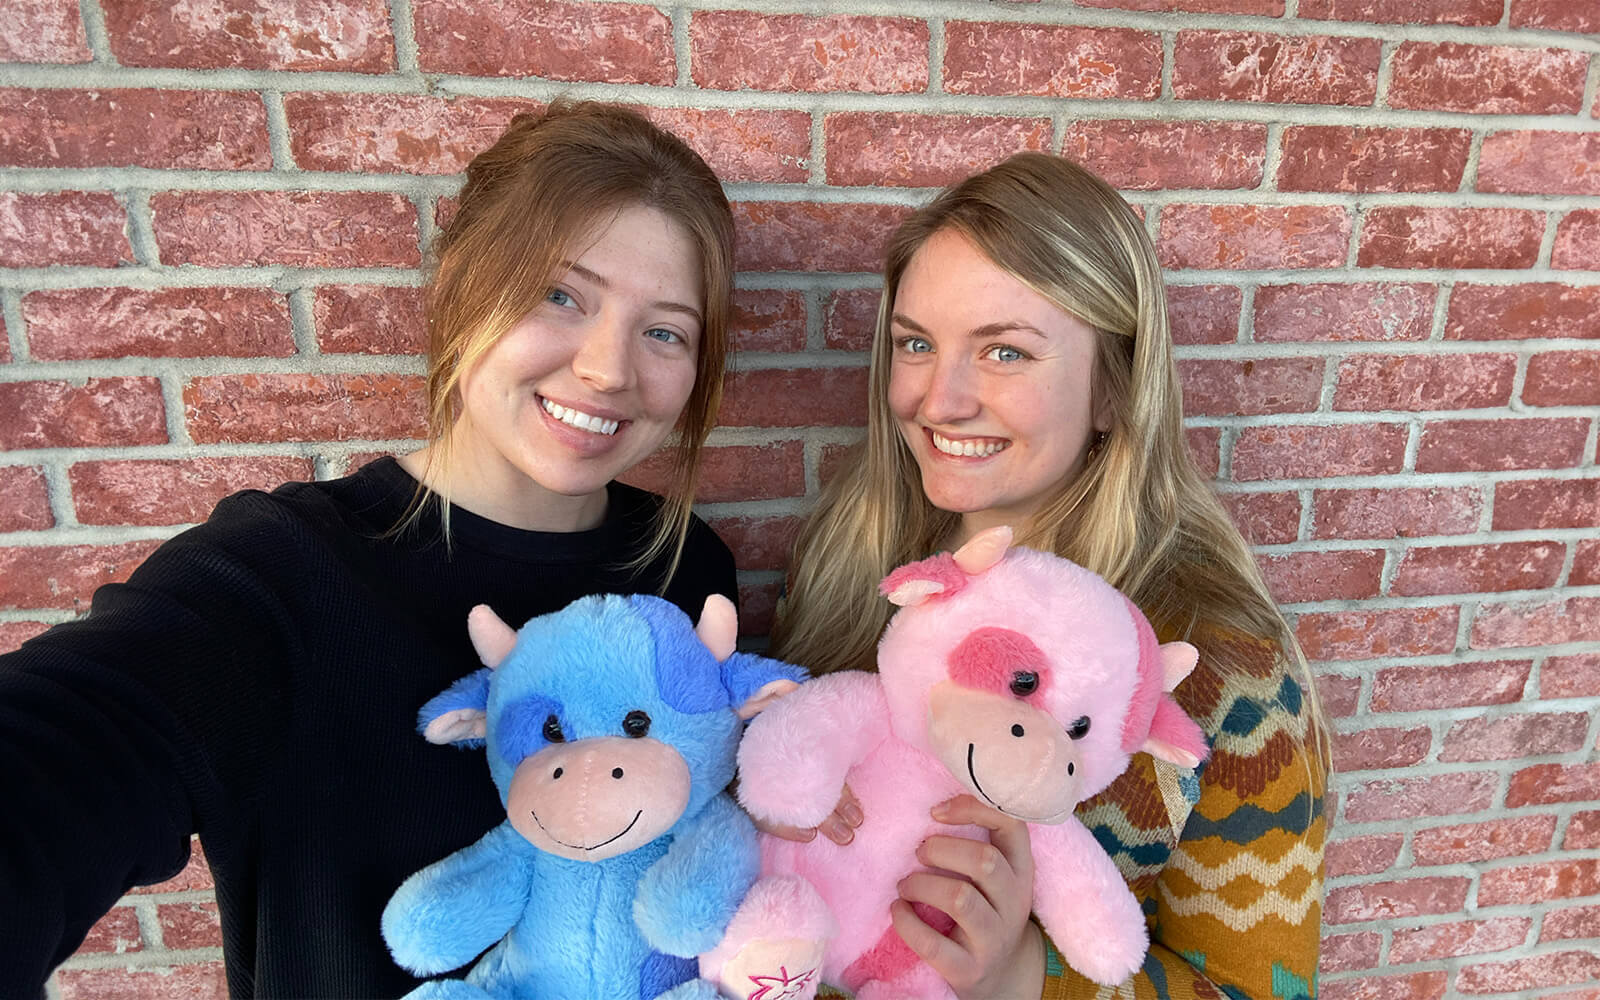 Pictured are two young ladies holding Beau the Blueberry Cow and Sally the Strawberry Cow